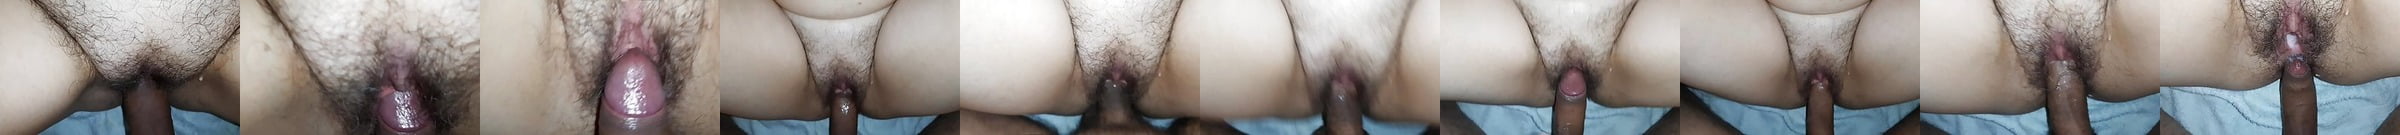 Wife Parts Panties And Spreads Hairy Pussy For Cum Porn